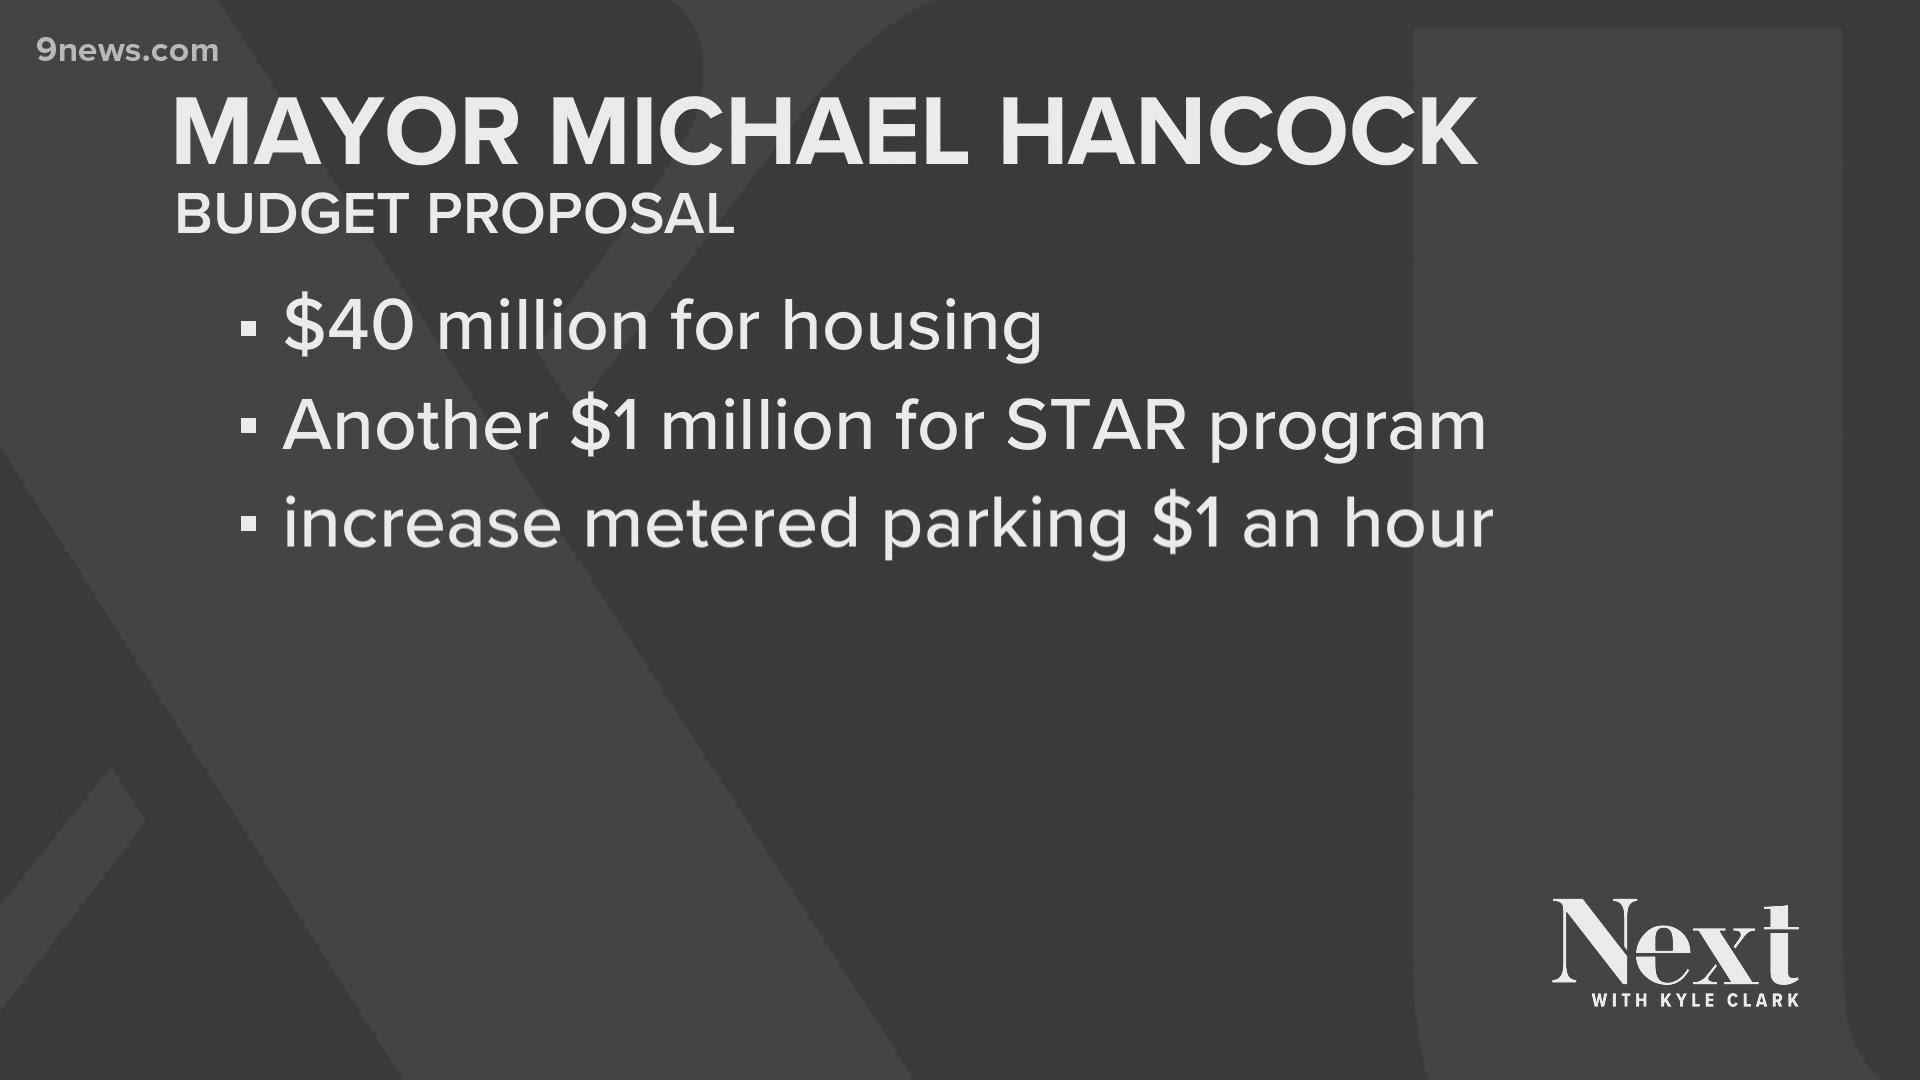 Mayor Michael Hancock's budget proposal released Tuesday includes a plan to raise metered parking rates from $1 to $2 an hour.